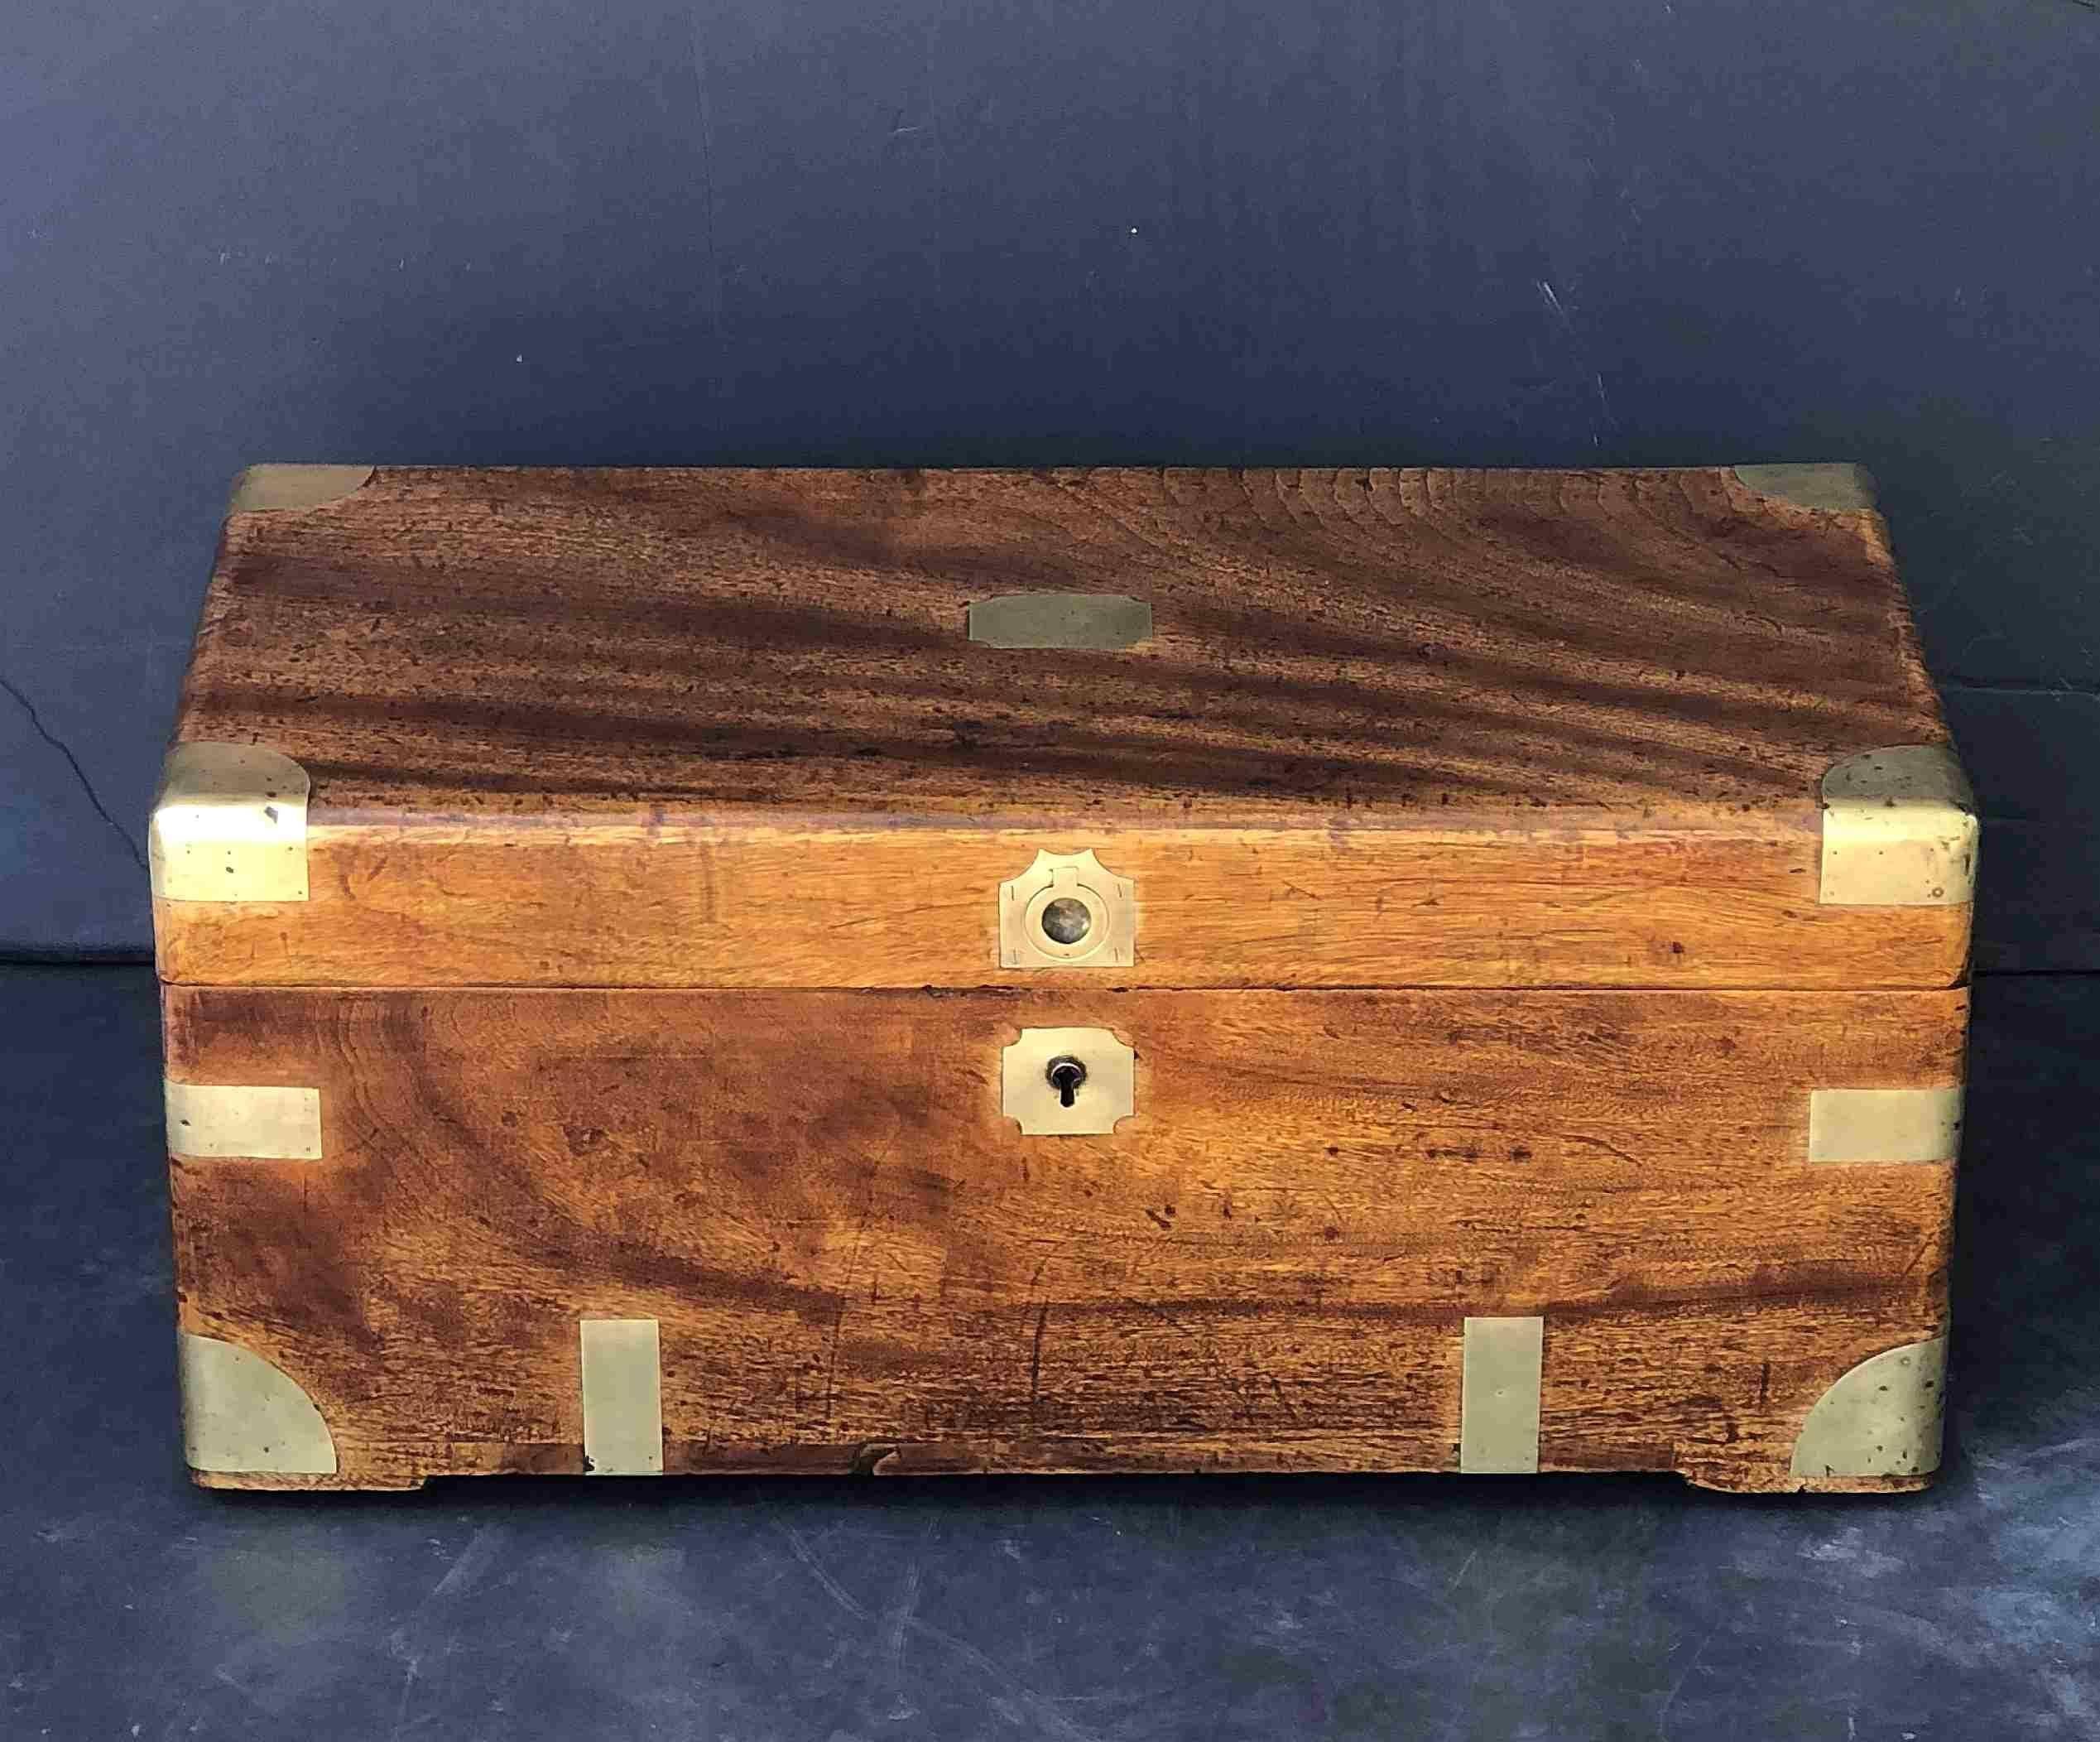 A handsome British military or naval officer's rectangular trunk or chest (coffer) of brass-bound camphor wood, manufactured for an officer to carry his kit on campaign.
With original recessed brass front latch, brass escutcheon, and brass carrying